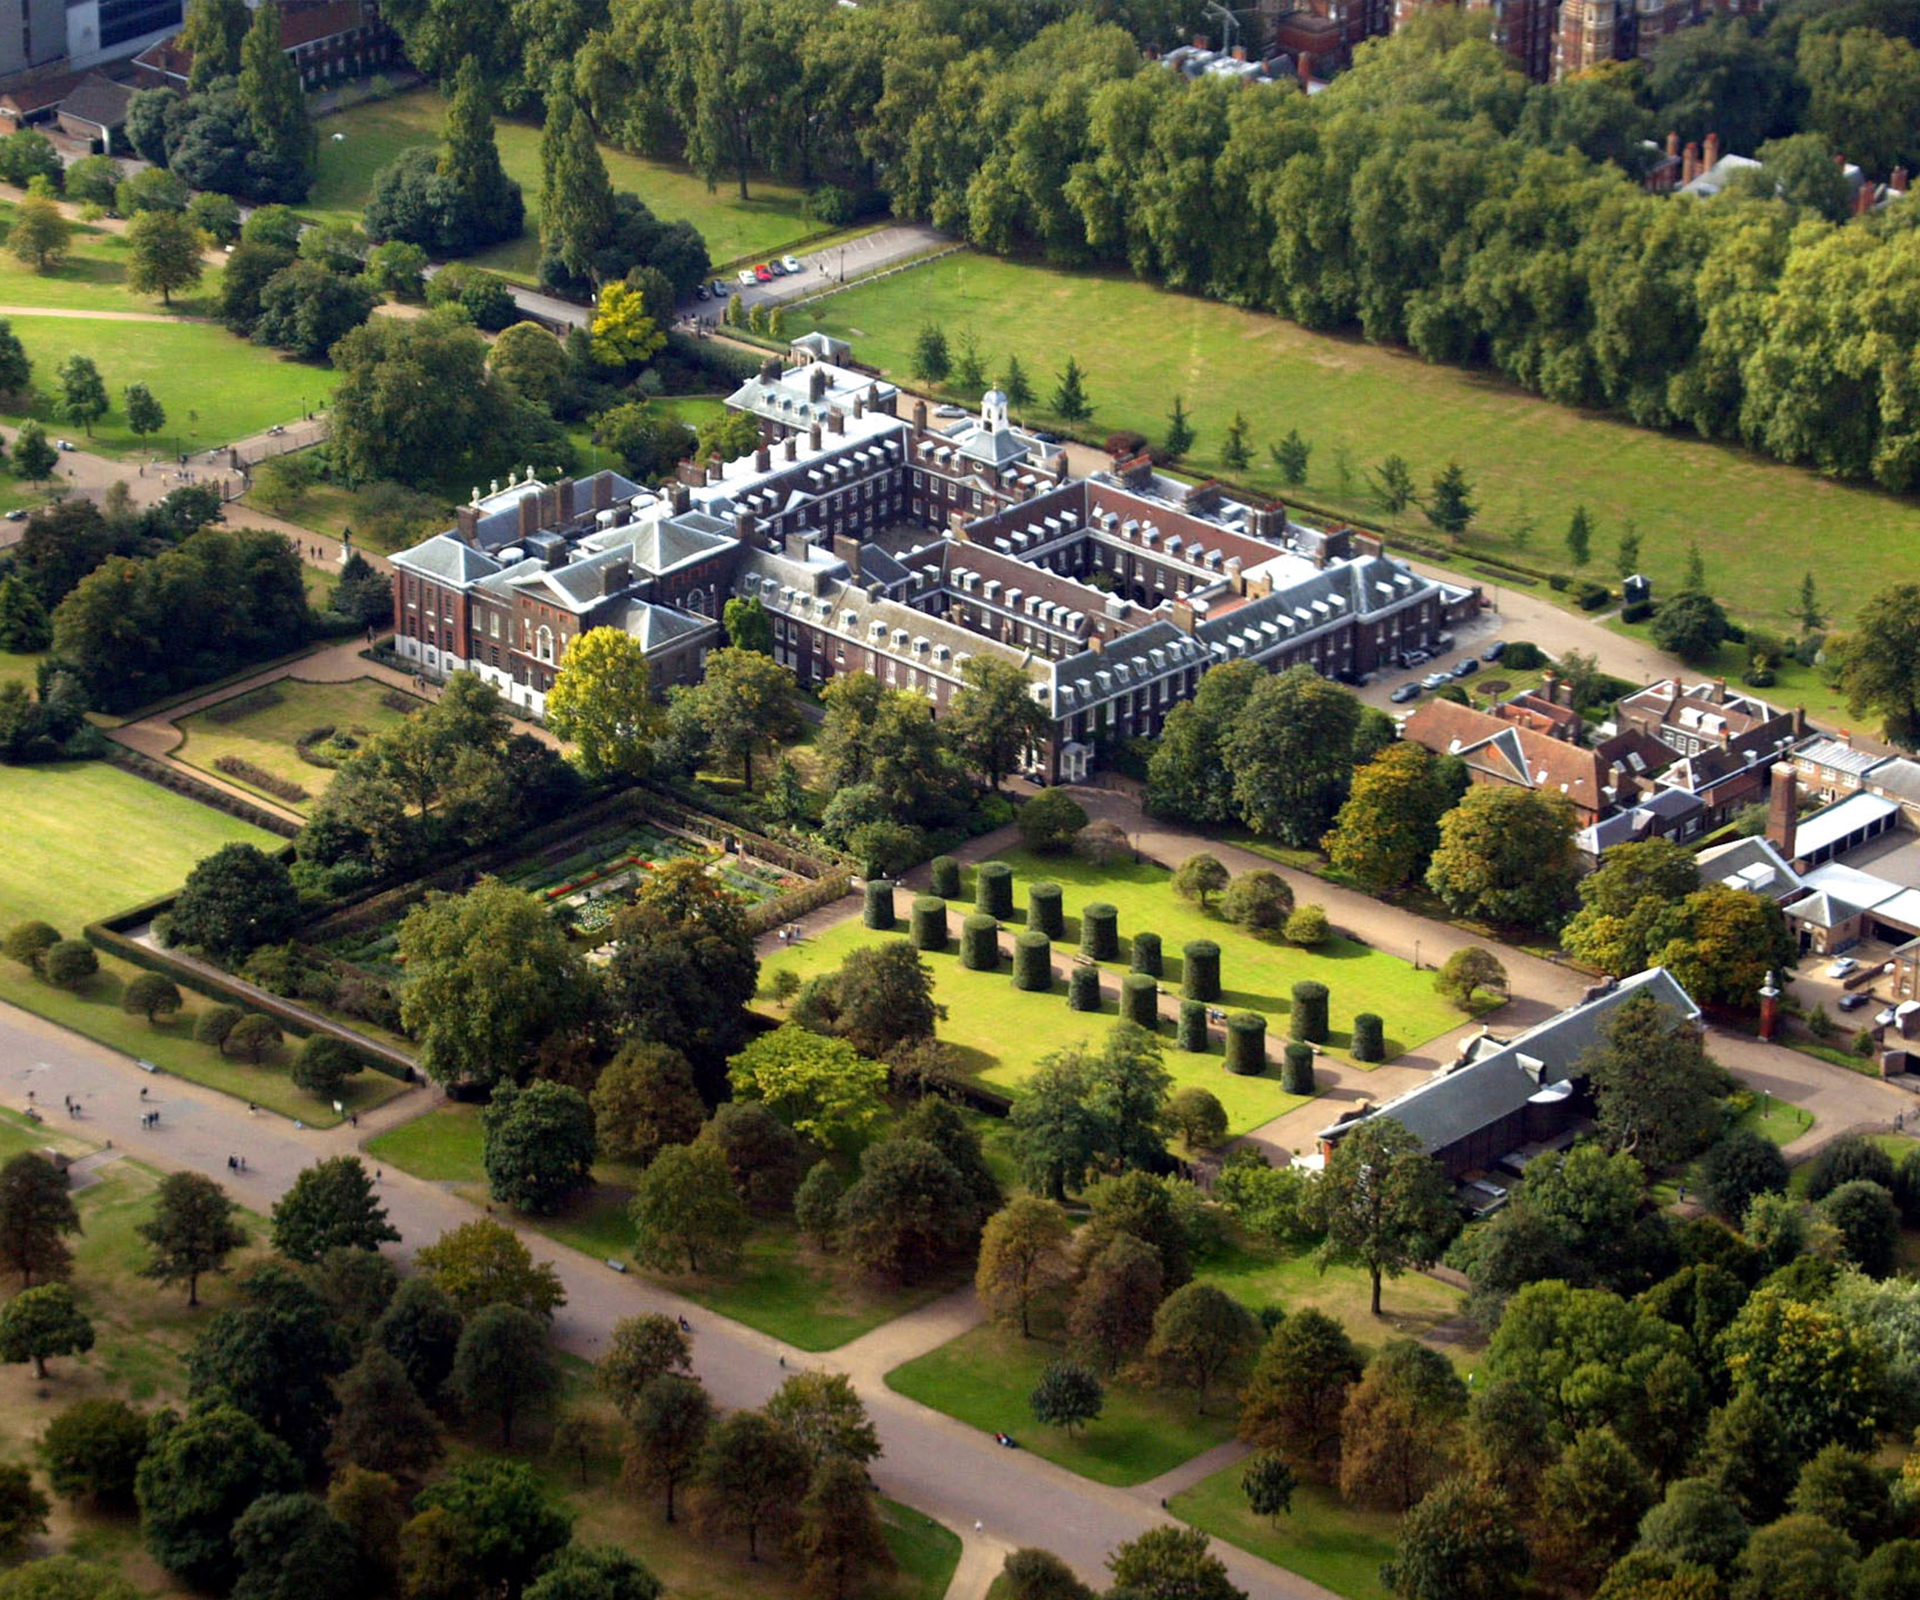 homes owned by the British royal family: Kensington Palace 